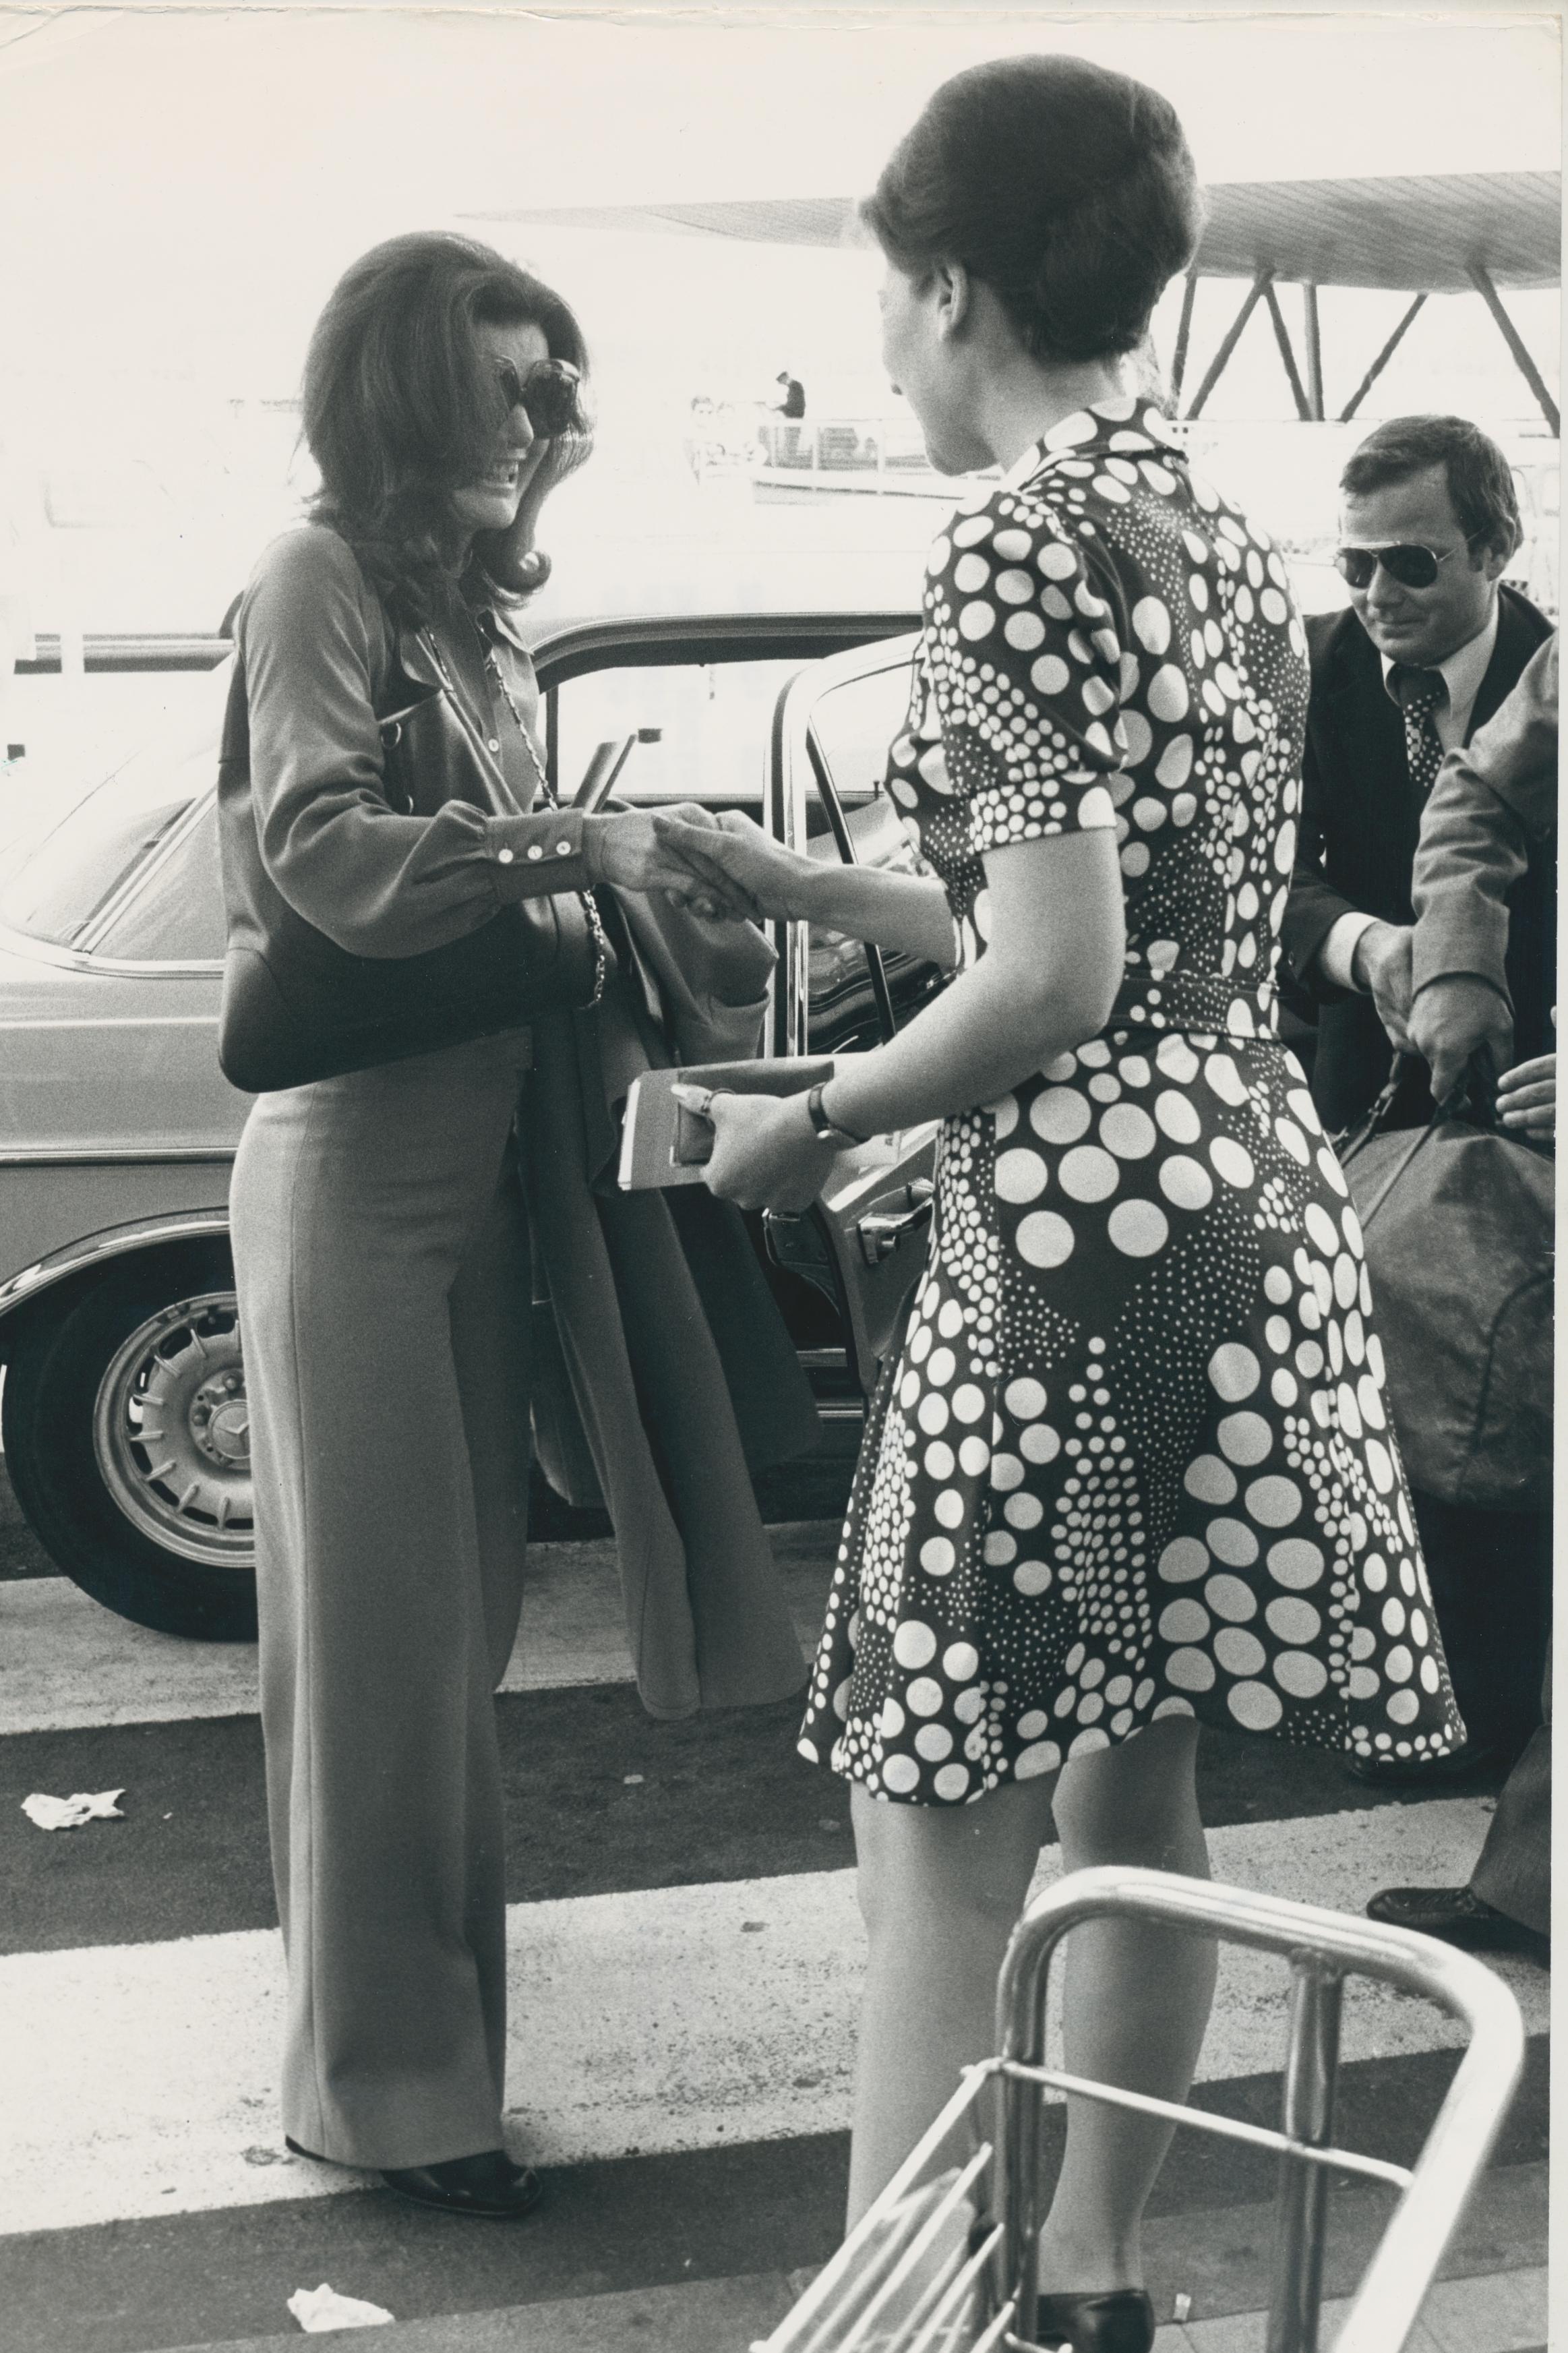 Jackie Kennedy at the Airport in Paris, France, ca. 1970s - Art by Michel Giniès